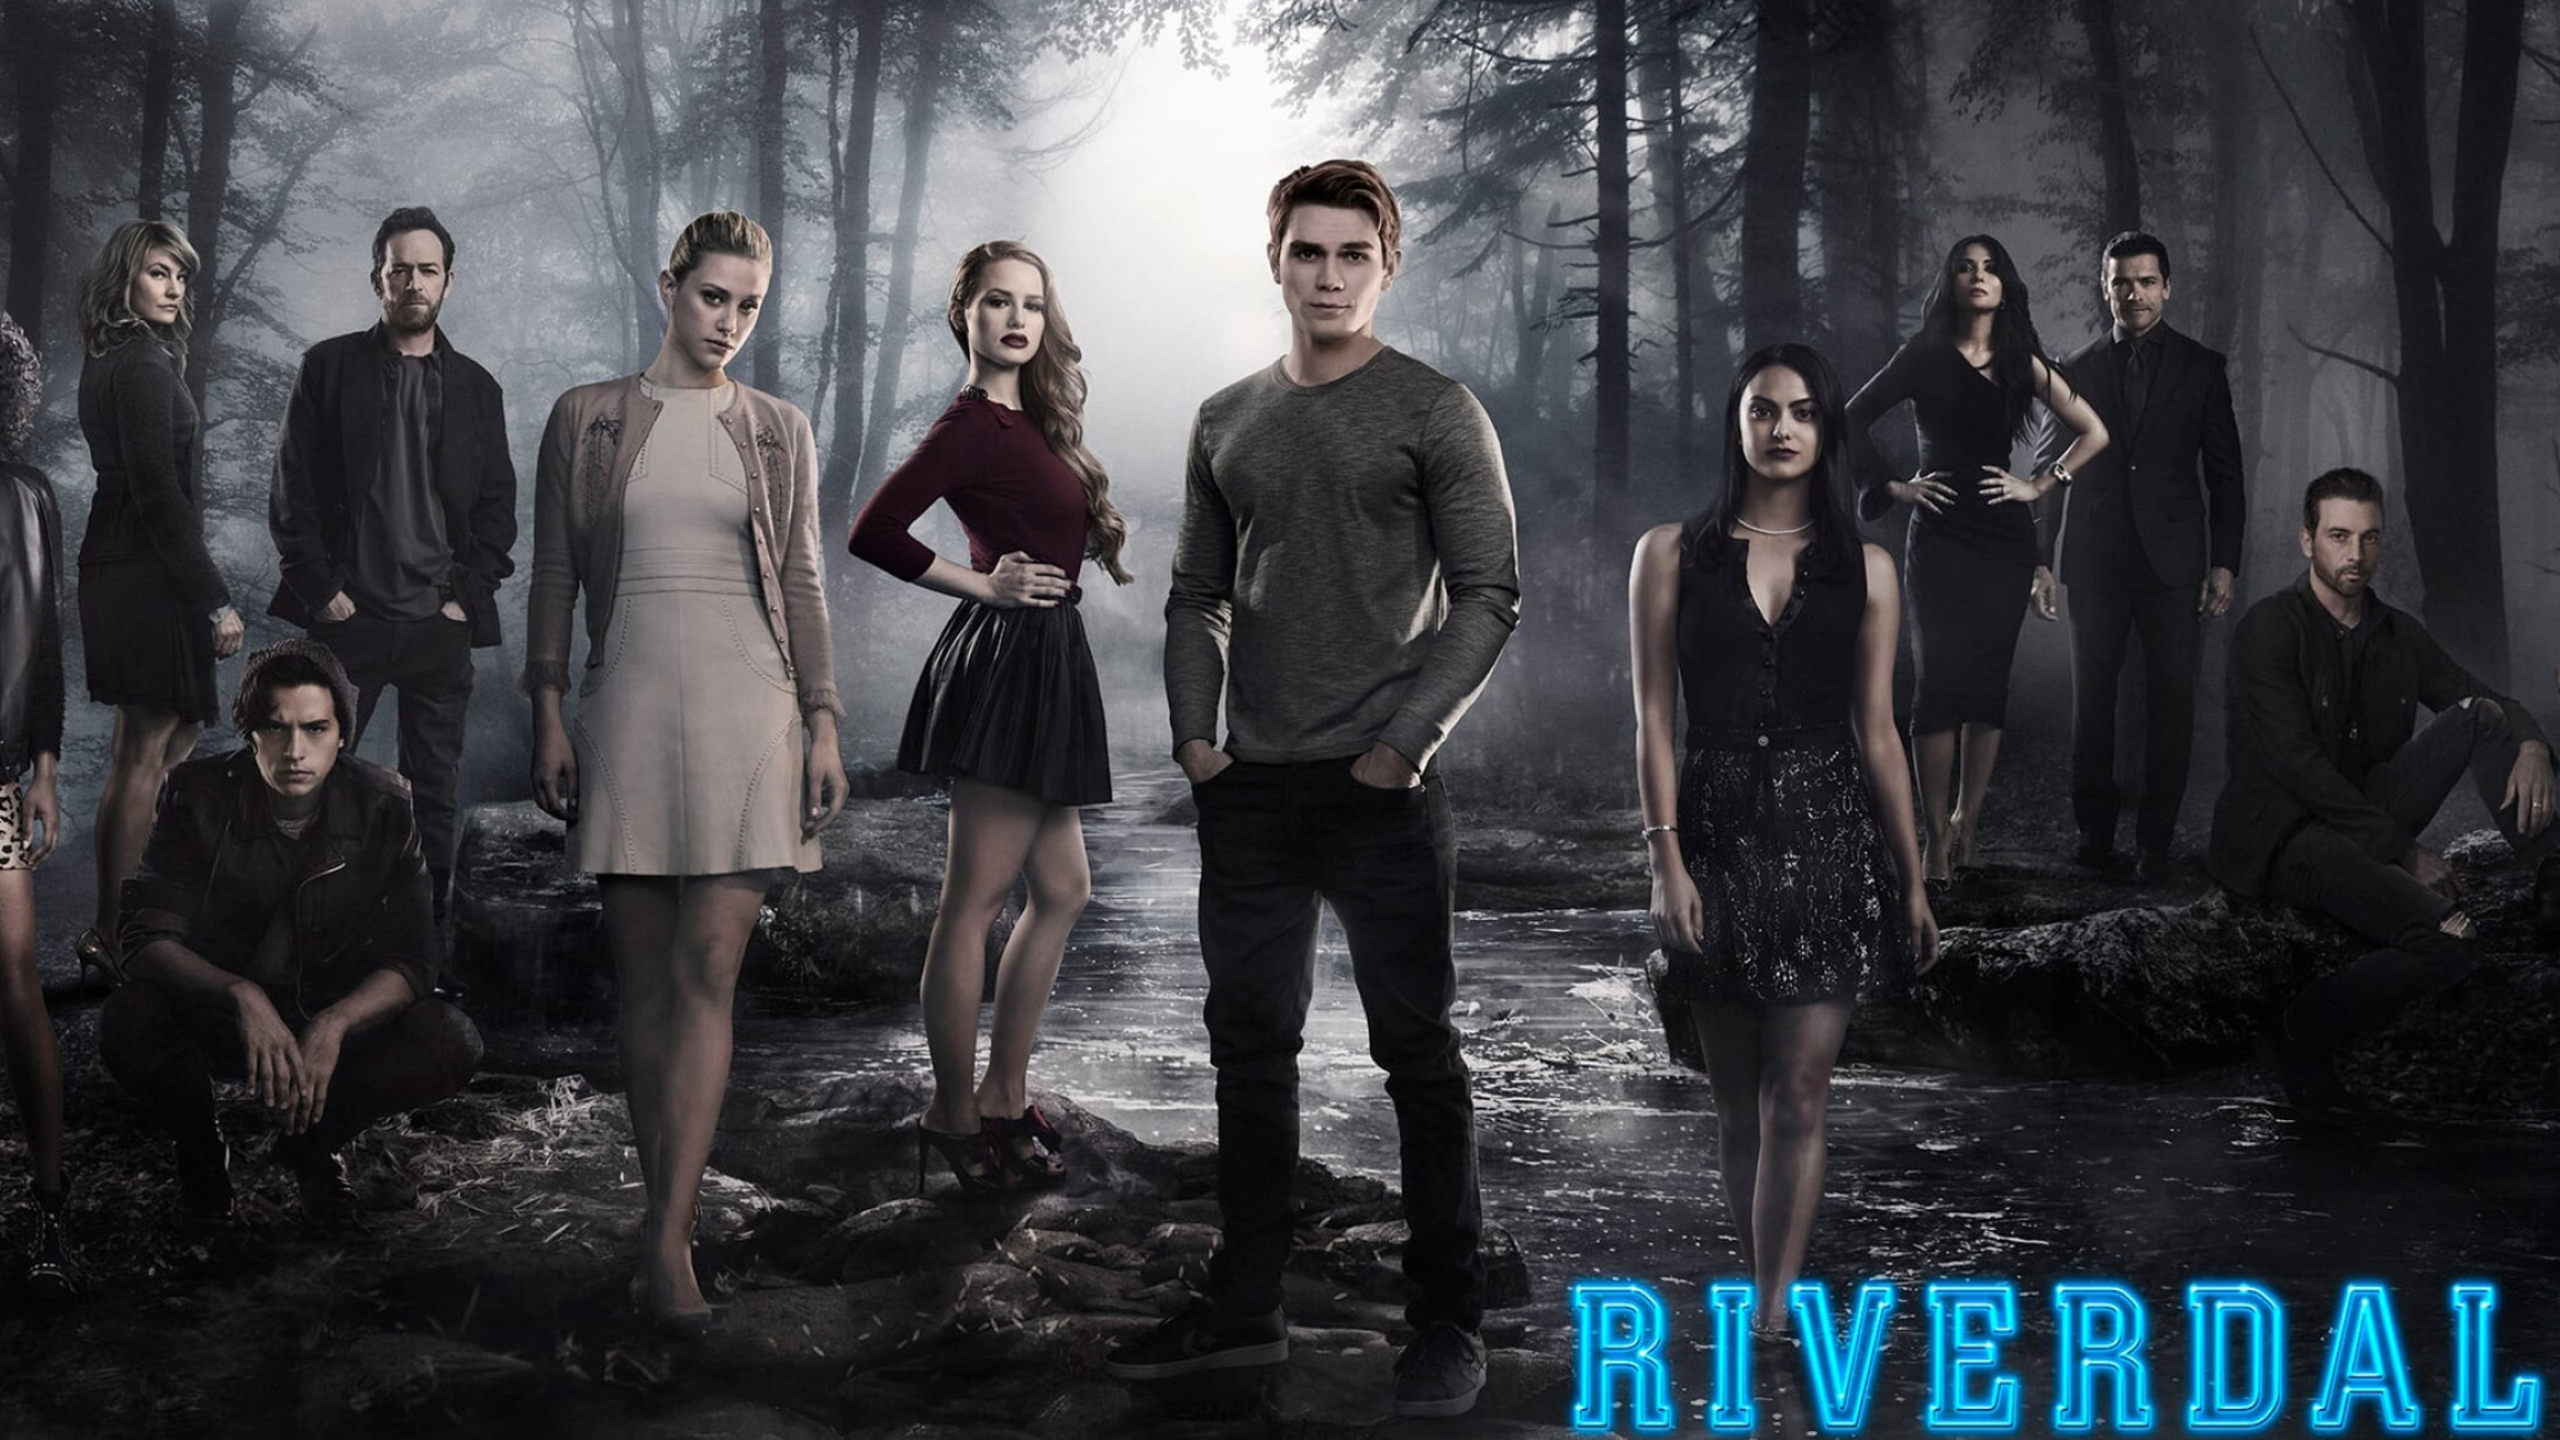 Riverdale (TV Series): The cast of the show is based on the characters of Archie Comics. 2560x1440 HD Background.